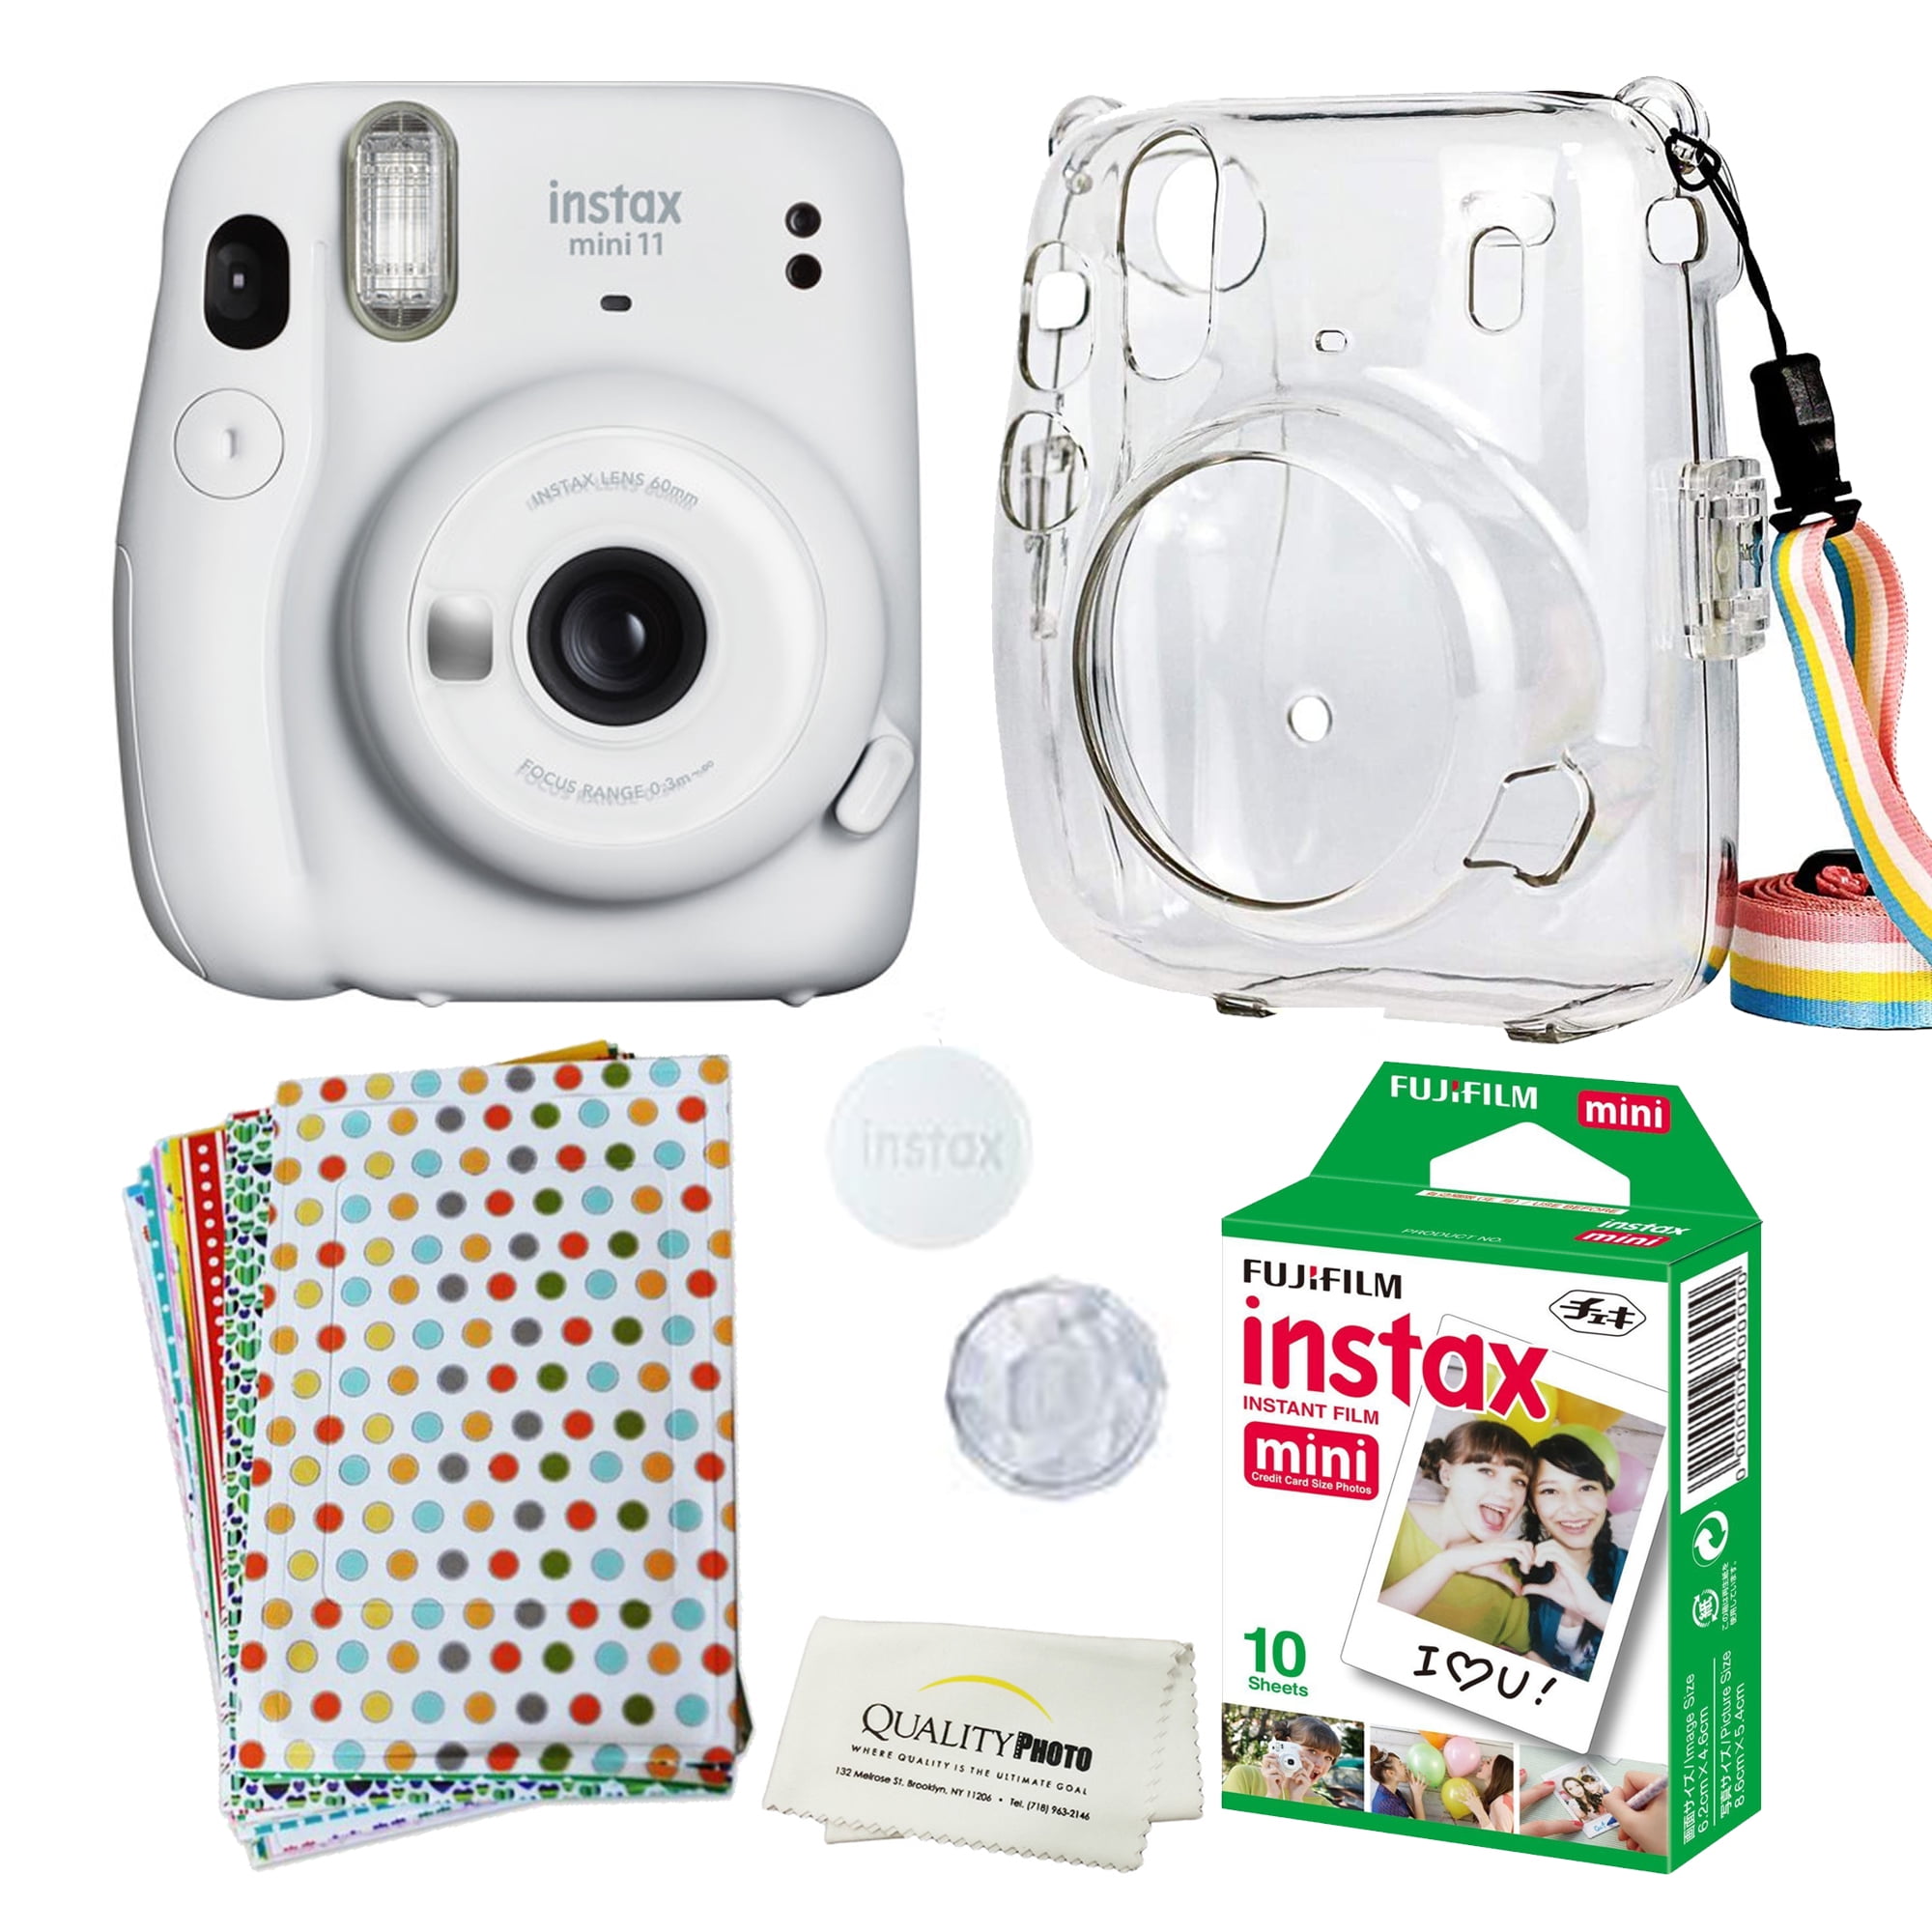  Fujifilm Instax Mini EVO Hybrid Instant Film Camera (Black)  (16745183) Bundle with 40 Instant Film Sheets + 32GB Memory Card + Small  Padded Case + SD Card Reader + Microfiber Cleaning Cloth : Electronics